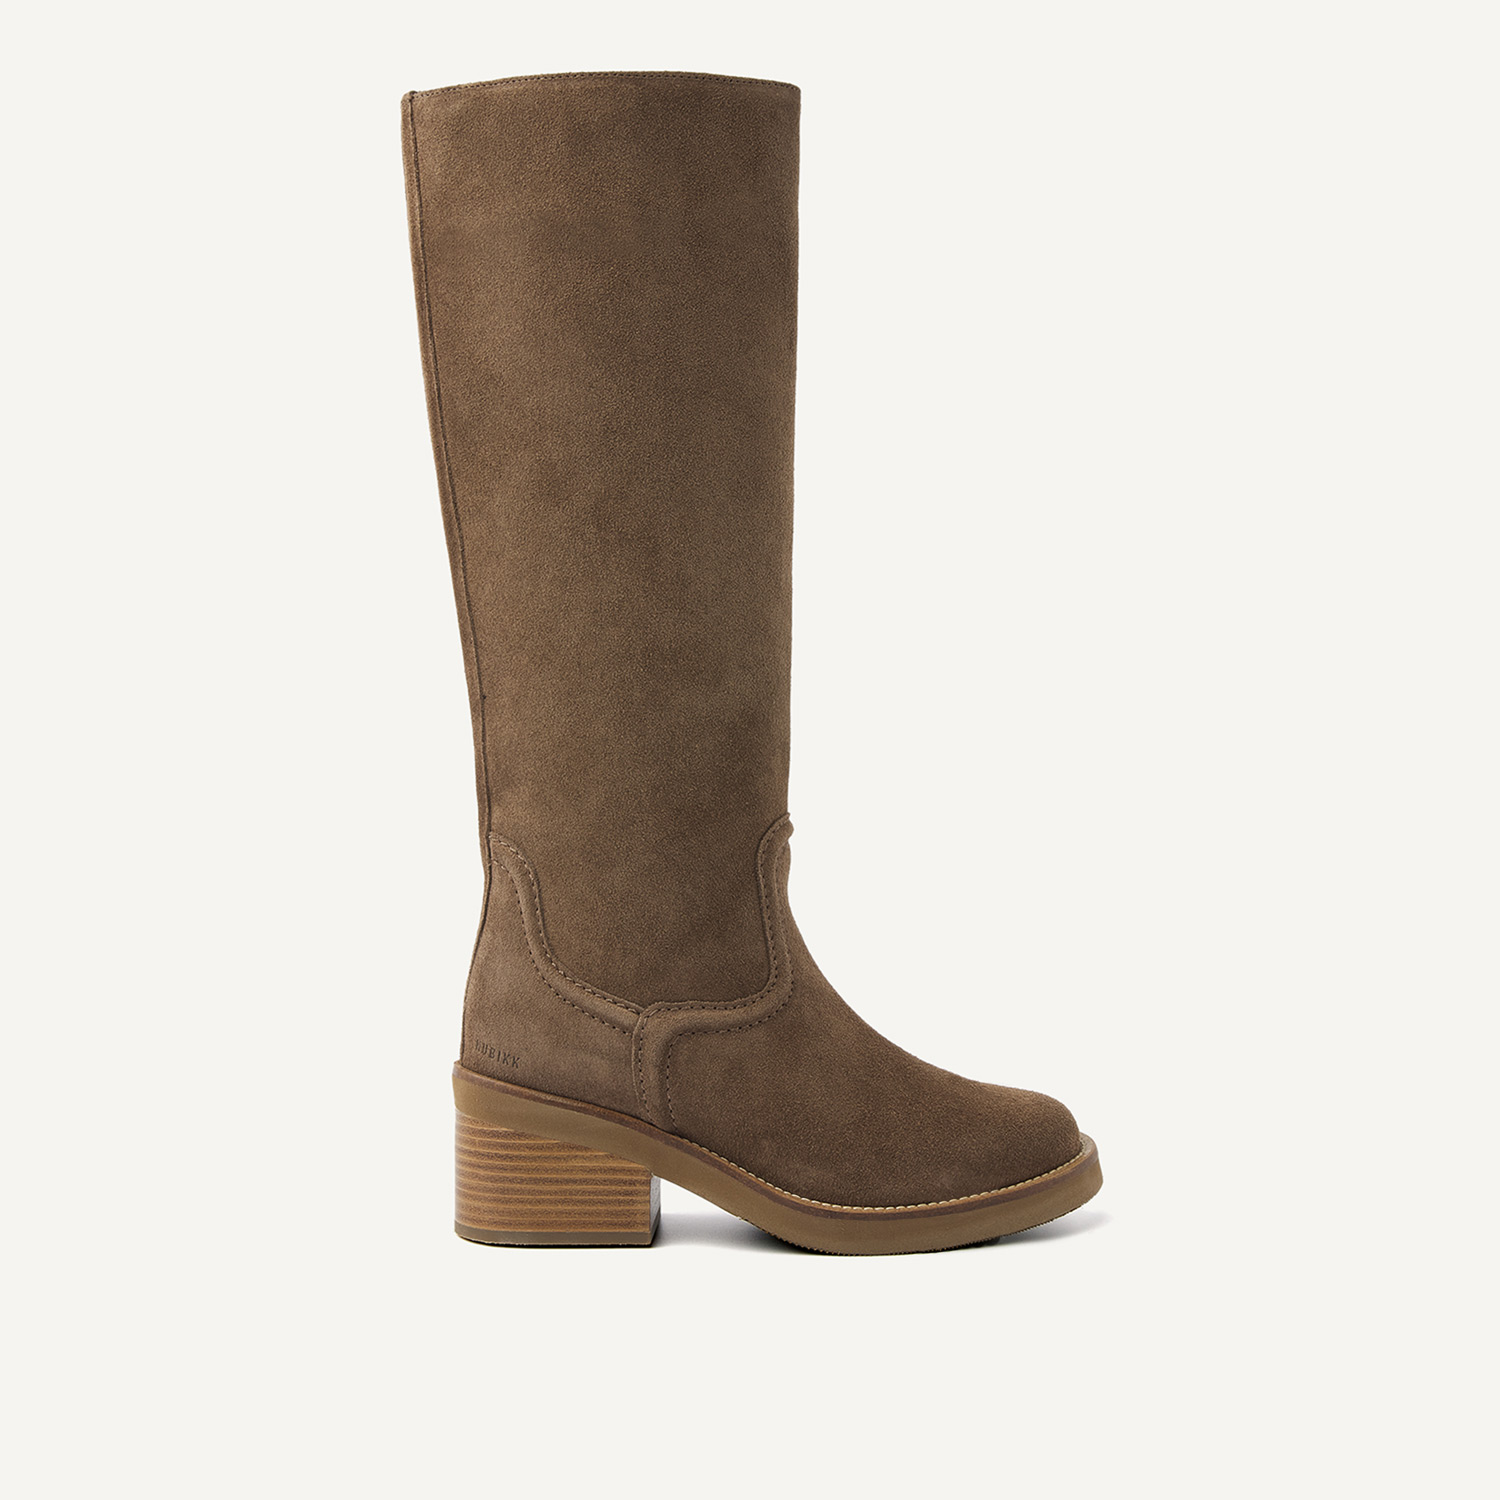 Cassy Boot | Brown Suede Boots for Women